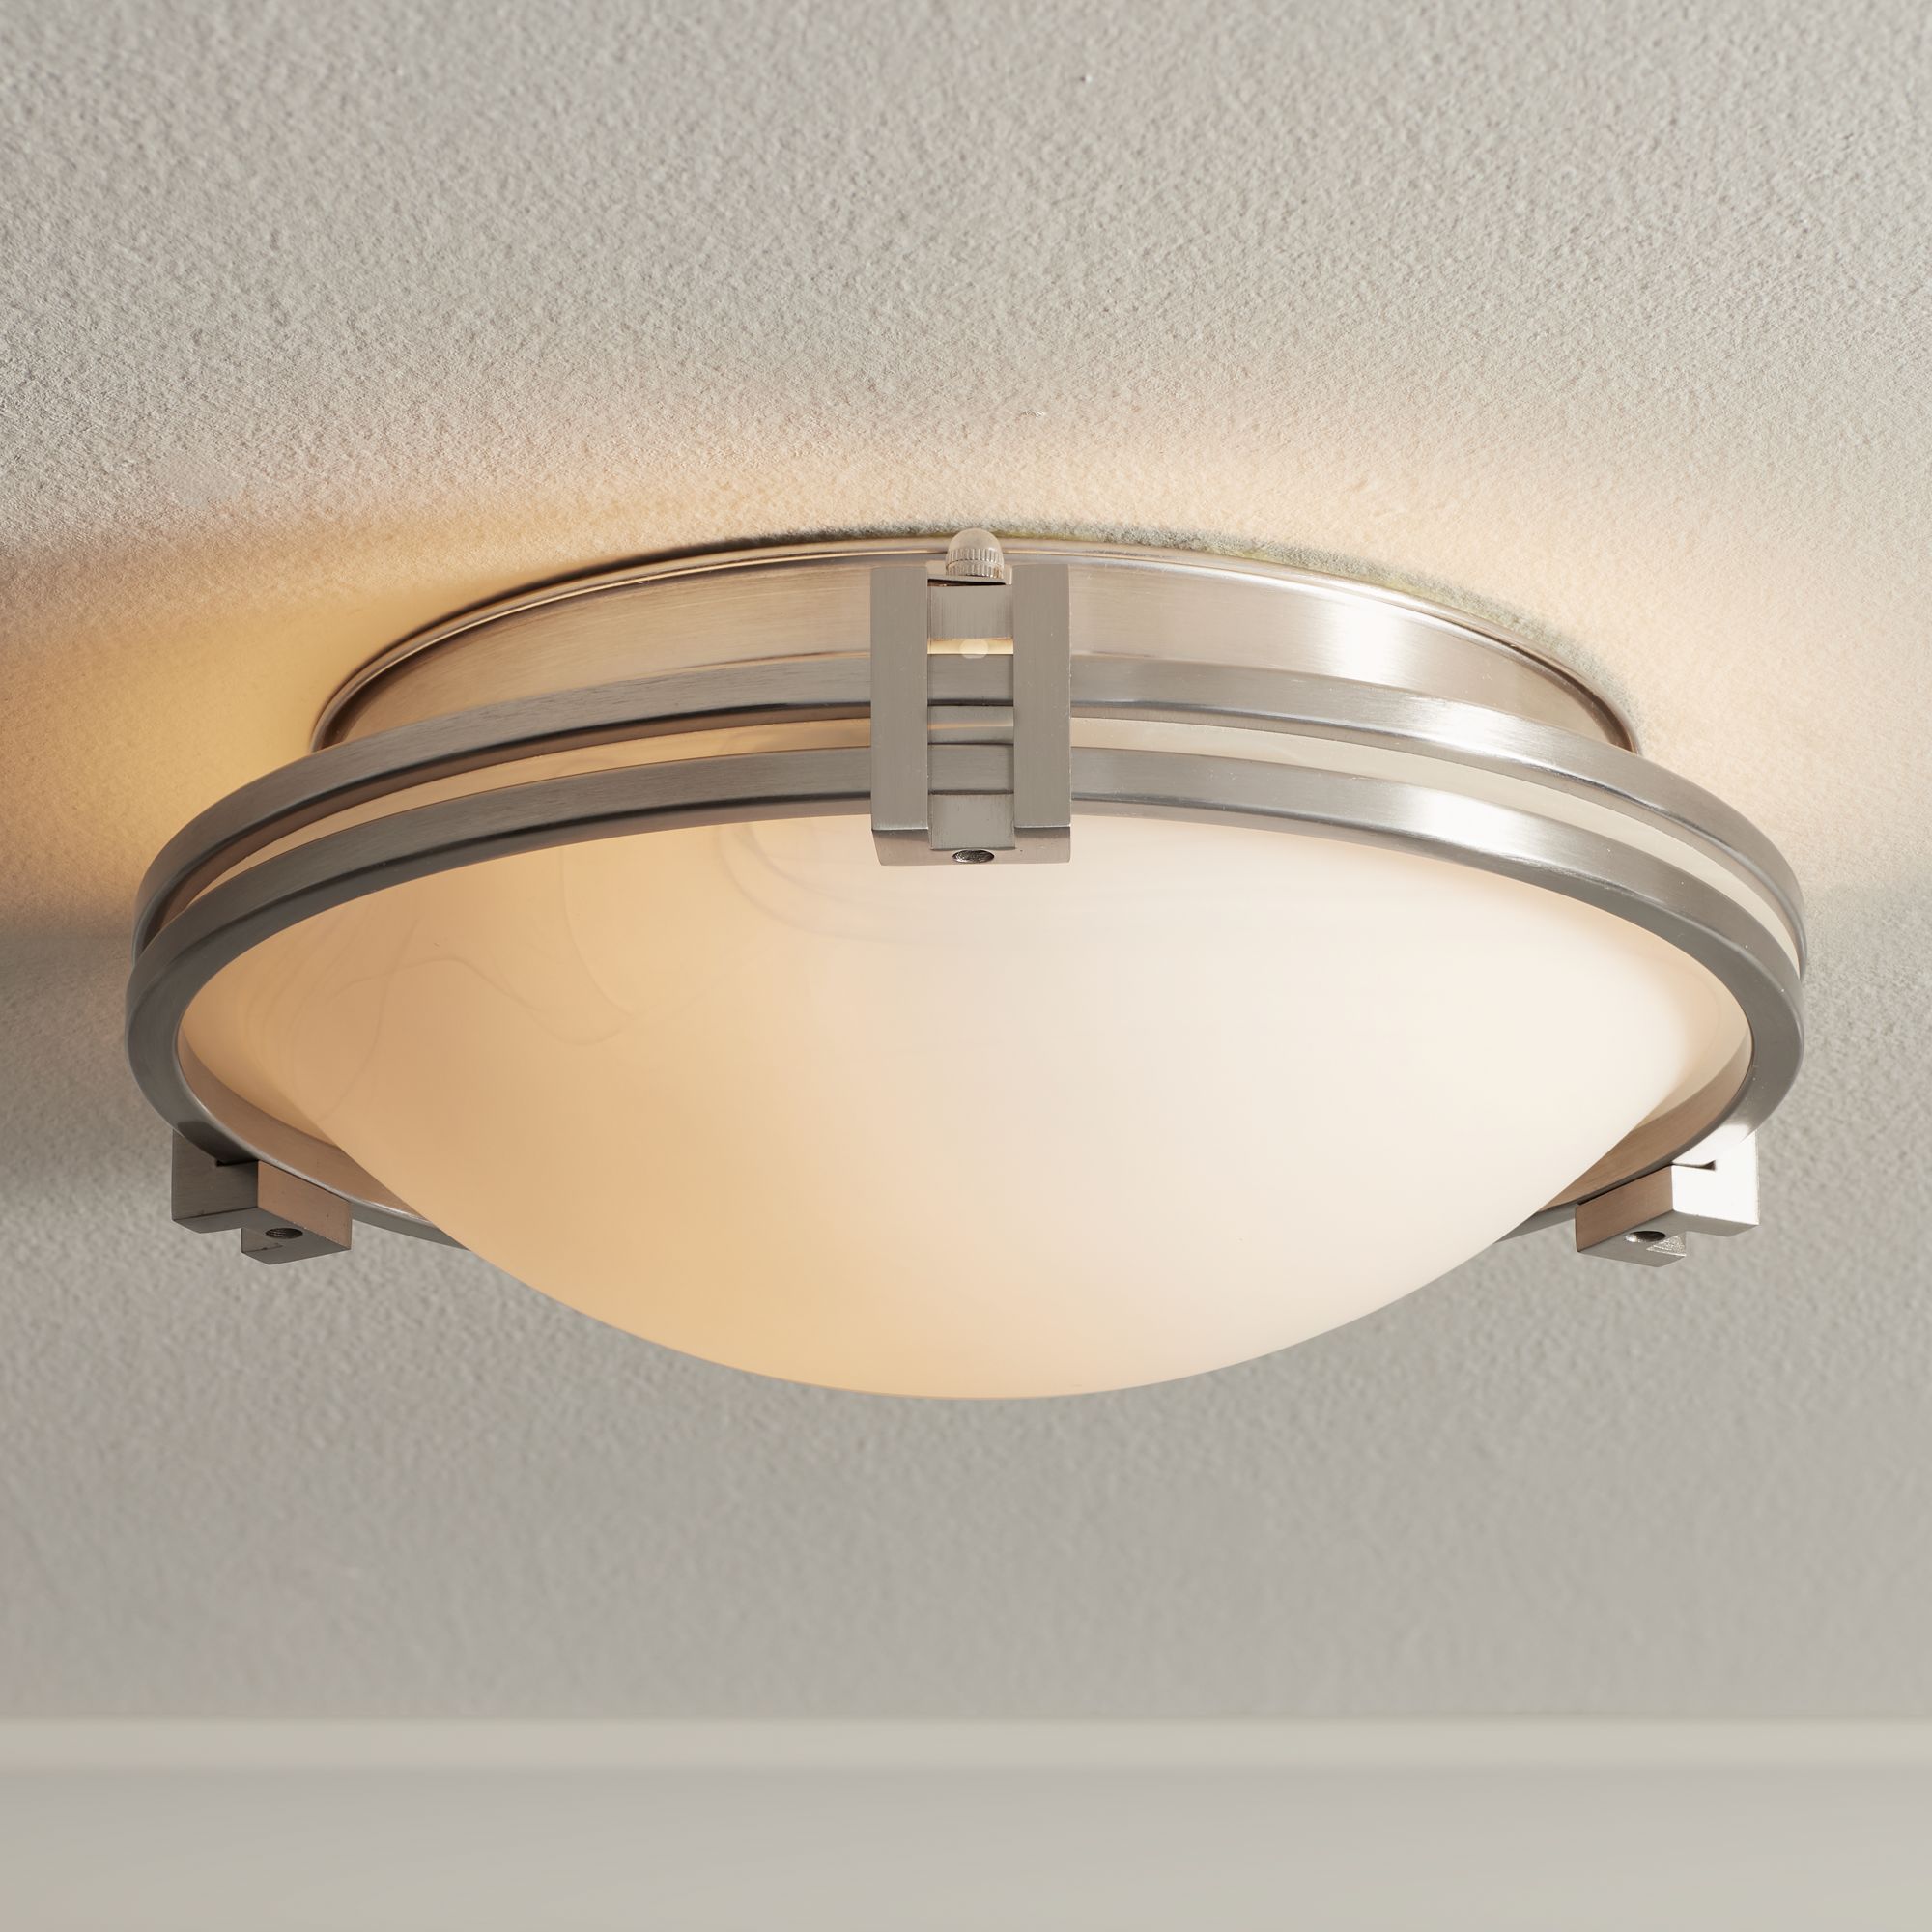 small ceiling light fixtures